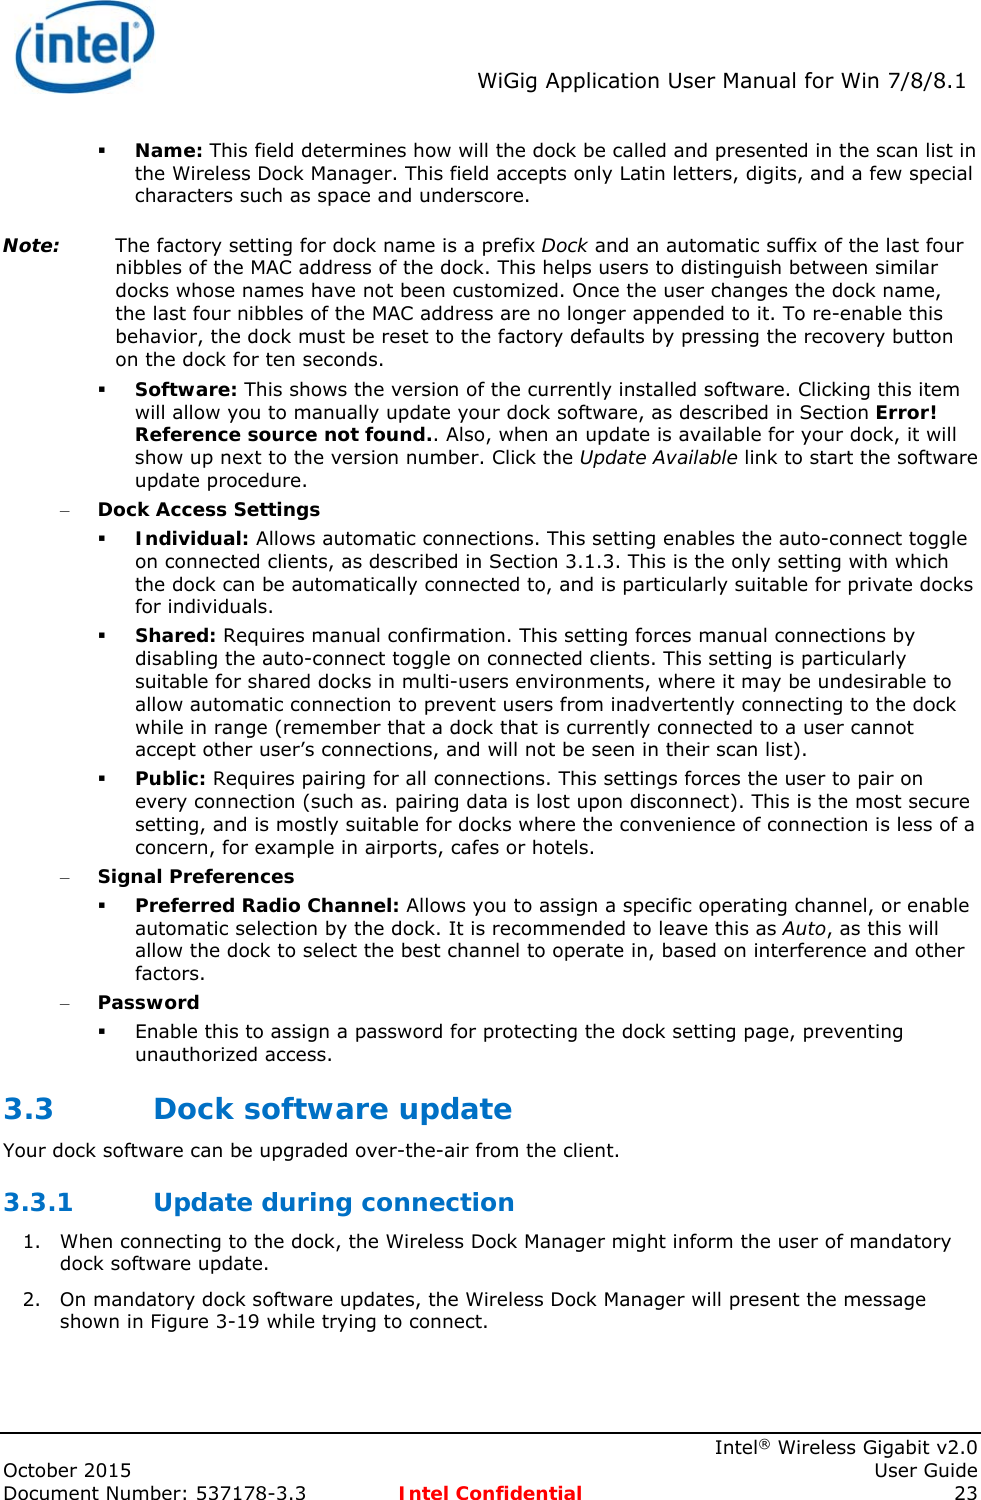  WiGig Application User Manual for Win 7/8/8.1    Intel® Wireless Gigabit v2.0 October 2015    User Guide Document Number: 537178-3.3  Intel Confidential 23  Name: This field determines how will the dock be called and presented in the scan list in the Wireless Dock Manager. This field accepts only Latin letters, digits, and a few special characters such as space and underscore. Note: The factory setting for dock name is a prefix Dock and an automatic suffix of the last four nibbles of the MAC address of the dock. This helps users to distinguish between similar docks whose names have not been customized. Once the user changes the dock name, the last four nibbles of the MAC address are no longer appended to it. To re-enable this behavior, the dock must be reset to the factory defaults by pressing the recovery button on the dock for ten seconds.  Software: This shows the version of the currently installed software. Clicking this item will allow you to manually update your dock software, as described in Section Error! Reference source not found.. Also, when an update is available for your dock, it will show up next to the version number. Click the Update Available link to start the software update procedure. – Dock Access Settings  Individual: Allows automatic connections. This setting enables the auto-connect toggle on connected clients, as described in Section 3.1.3. This is the only setting with which the dock can be automatically connected to, and is particularly suitable for private docks for individuals.  Shared: Requires manual confirmation. This setting forces manual connections by disabling the auto-connect toggle on connected clients. This setting is particularly suitable for shared docks in multi-users environments, where it may be undesirable to allow automatic connection to prevent users from inadvertently connecting to the dock while in range (remember that a dock that is currently connected to a user cannot accept other user’s connections, and will not be seen in their scan list).  Public: Requires pairing for all connections. This settings forces the user to pair on every connection (such as. pairing data is lost upon disconnect). This is the most secure setting, and is mostly suitable for docks where the convenience of connection is less of a concern, for example in airports, cafes or hotels. – Signal Preferences  Preferred Radio Channel: Allows you to assign a specific operating channel, or enable automatic selection by the dock. It is recommended to leave this as Auto, as this will allow the dock to select the best channel to operate in, based on interference and other factors. – Password  Enable this to assign a password for protecting the dock setting page, preventing unauthorized access. 3.3 Dock software update Your dock software can be upgraded over-the-air from the client. 3.3.1 Update during connection 1. When connecting to the dock, the Wireless Dock Manager might inform the user of mandatory dock software update. 2. On mandatory dock software updates, the Wireless Dock Manager will present the message shown in Figure 3-19 while trying to connect. 